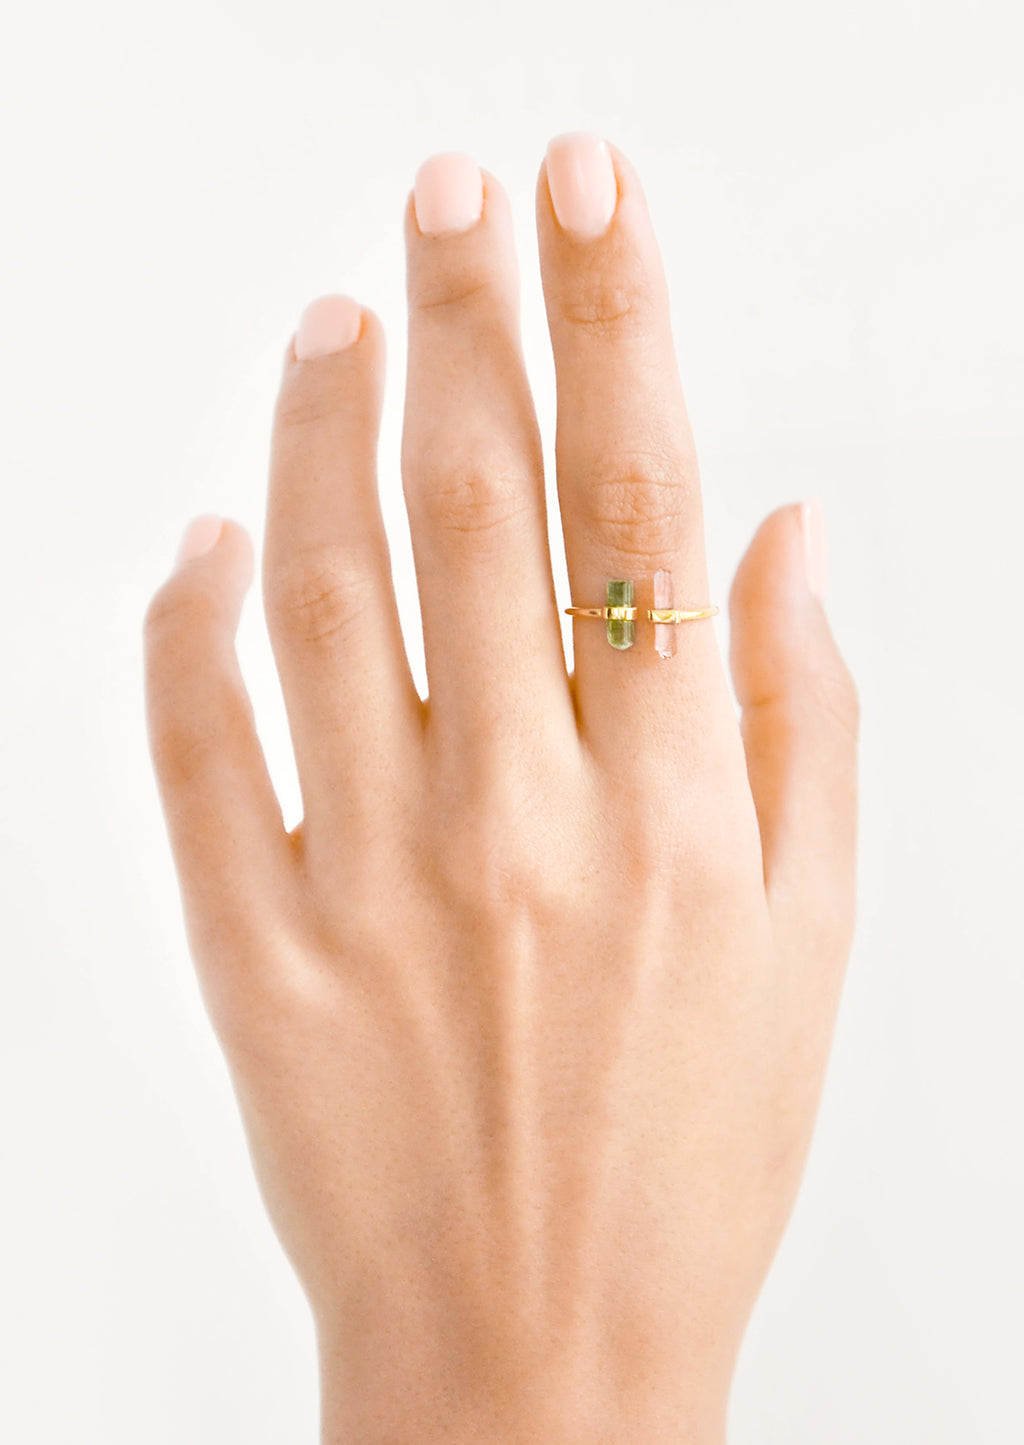 2: Model shot showing hand wearing ring with crystals.